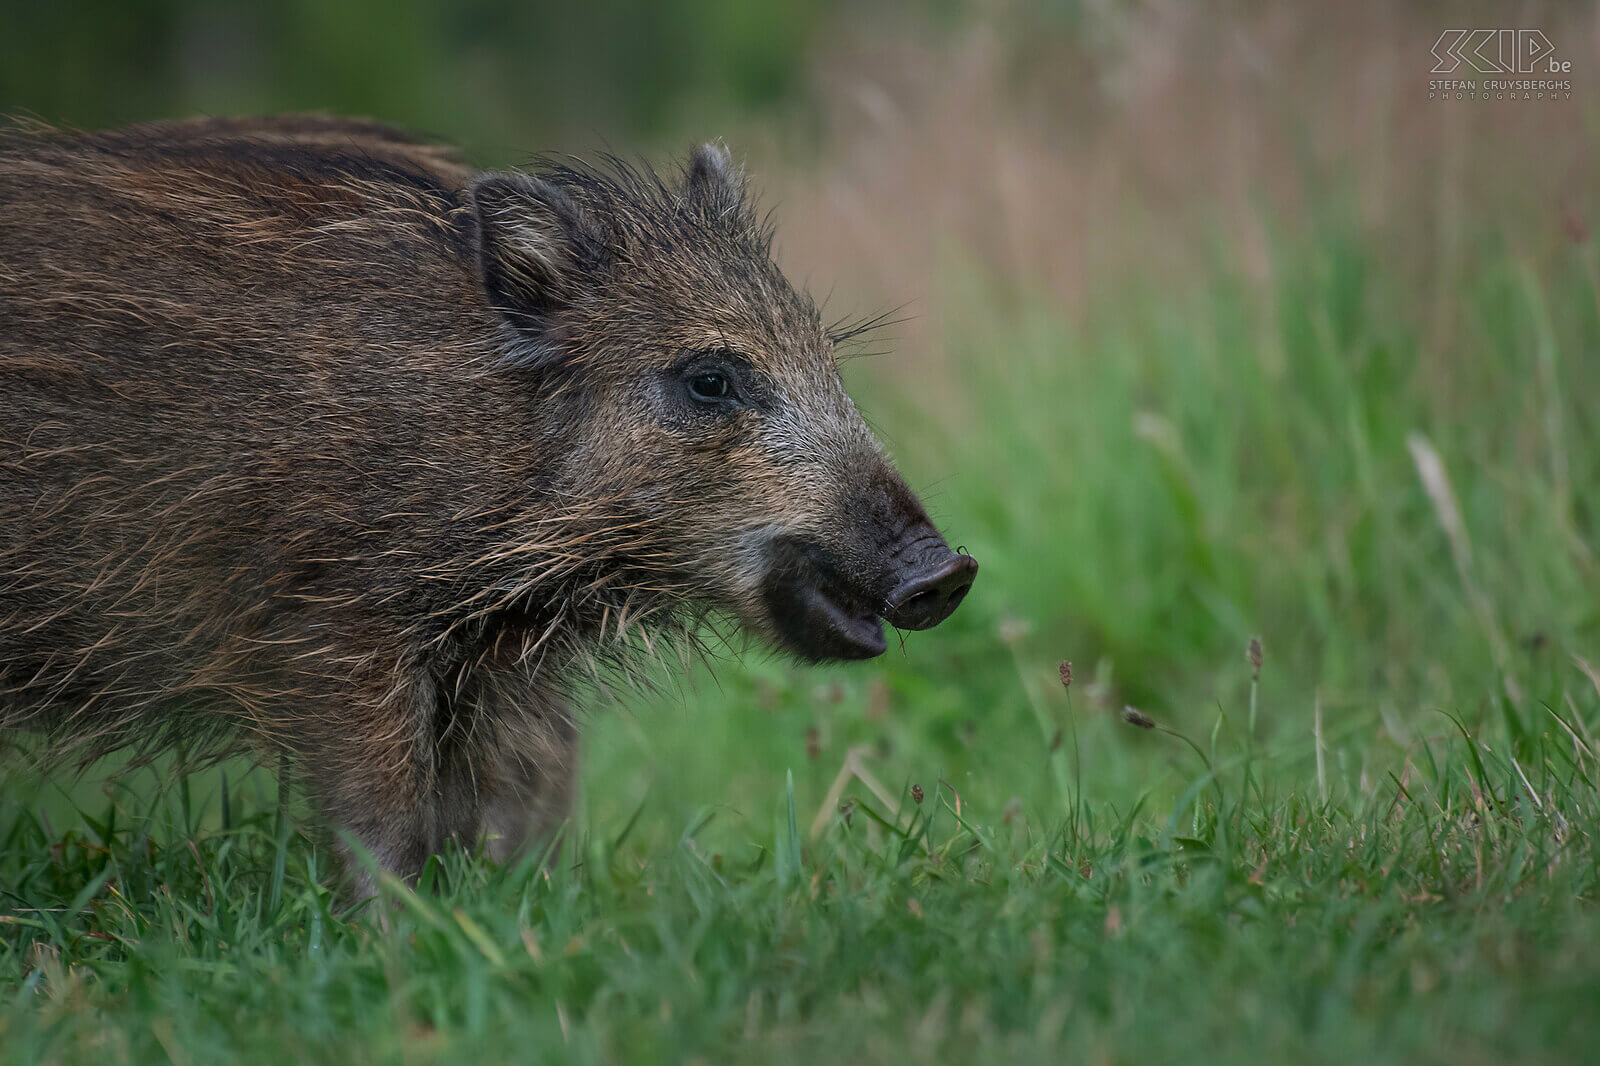 Juvenile wild boar The smallest boars are called squeakers. After2 years they leave their mother. These wild boars weigh between 25 and 40 kg. Stefan Cruysberghs